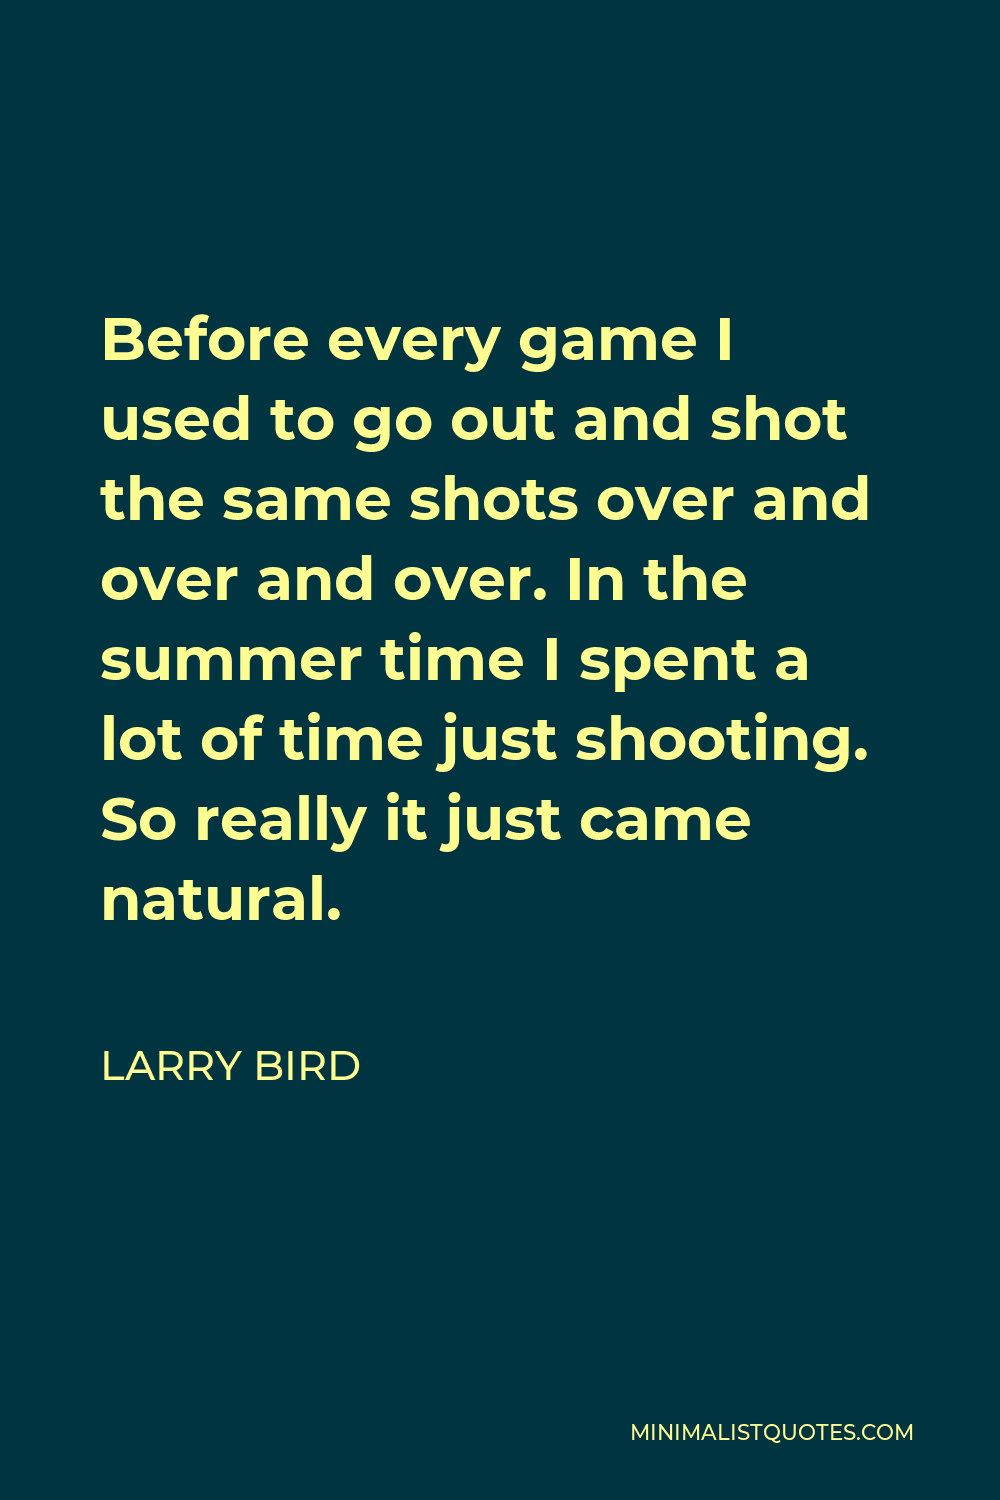 Larry Bird Quote - Before every game I used to go out and shot the same shots over and over and over. In the summer time I spent a lot of time just shooting. So really it just came natural.